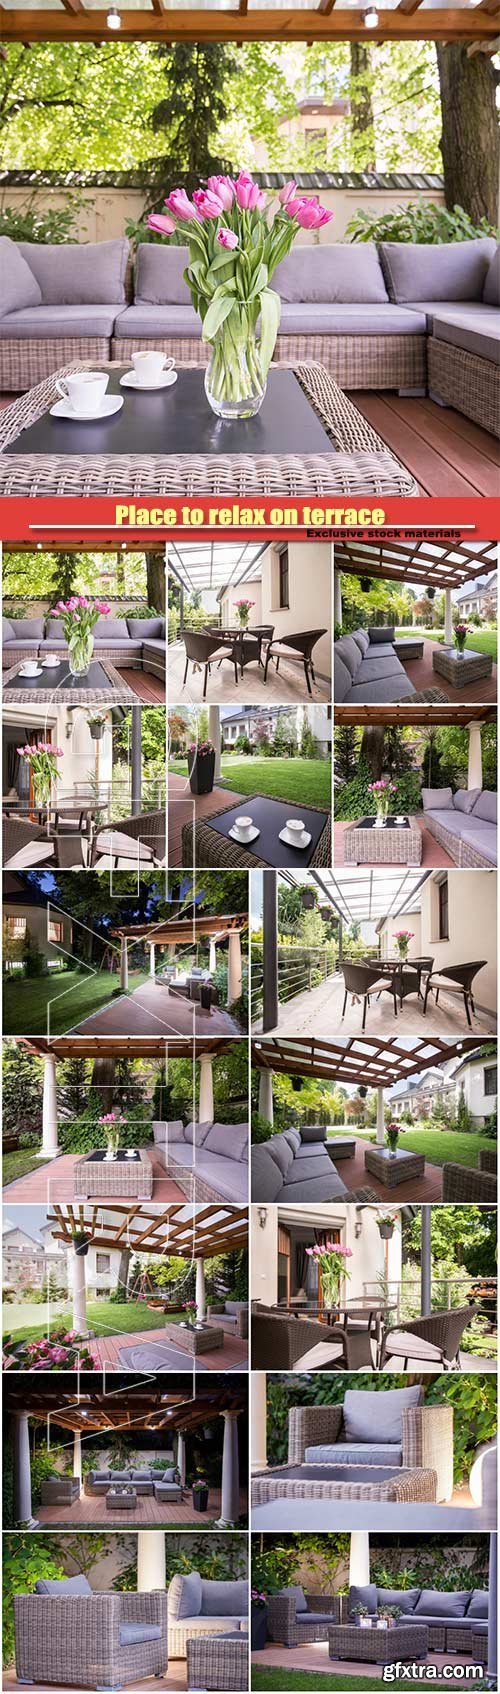 Place to relax on terrace, elegant rattan garden furnitures